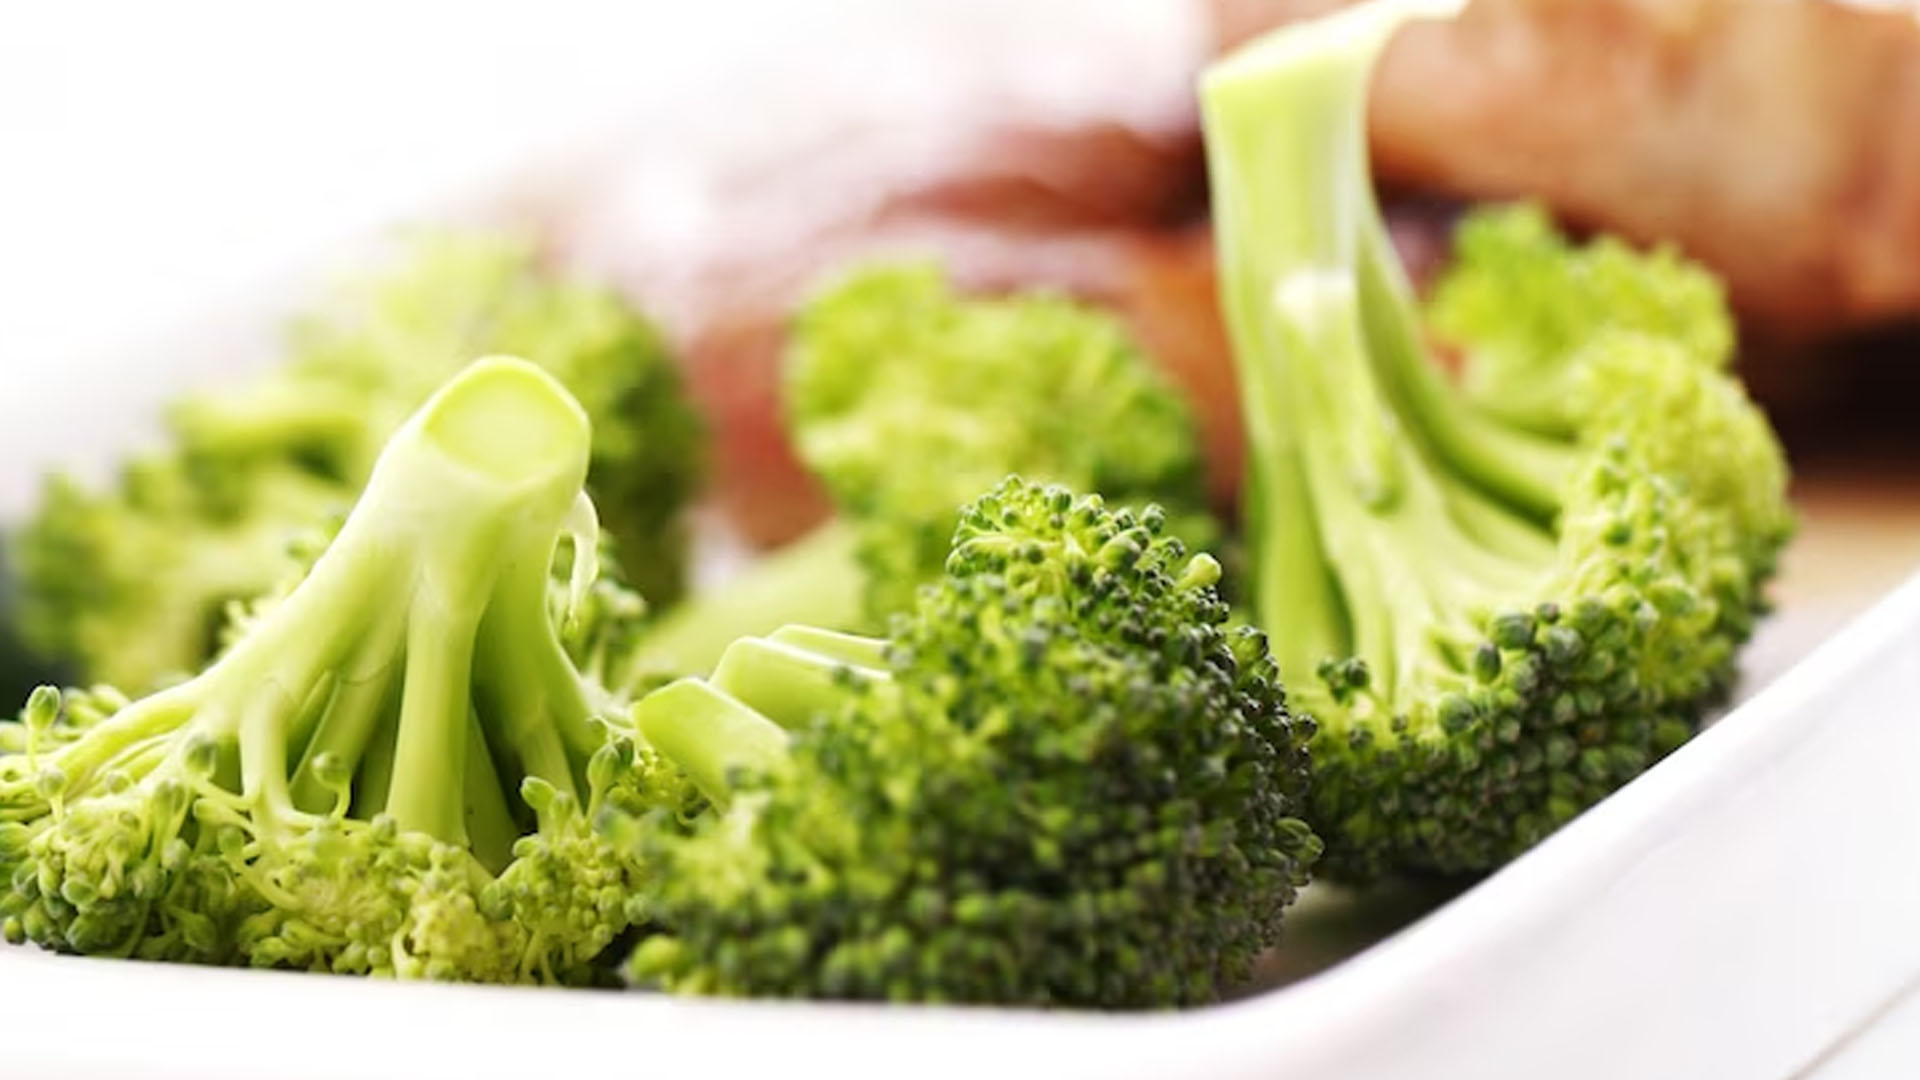 What Are The Health Benefits of Broccoli Sprouts?